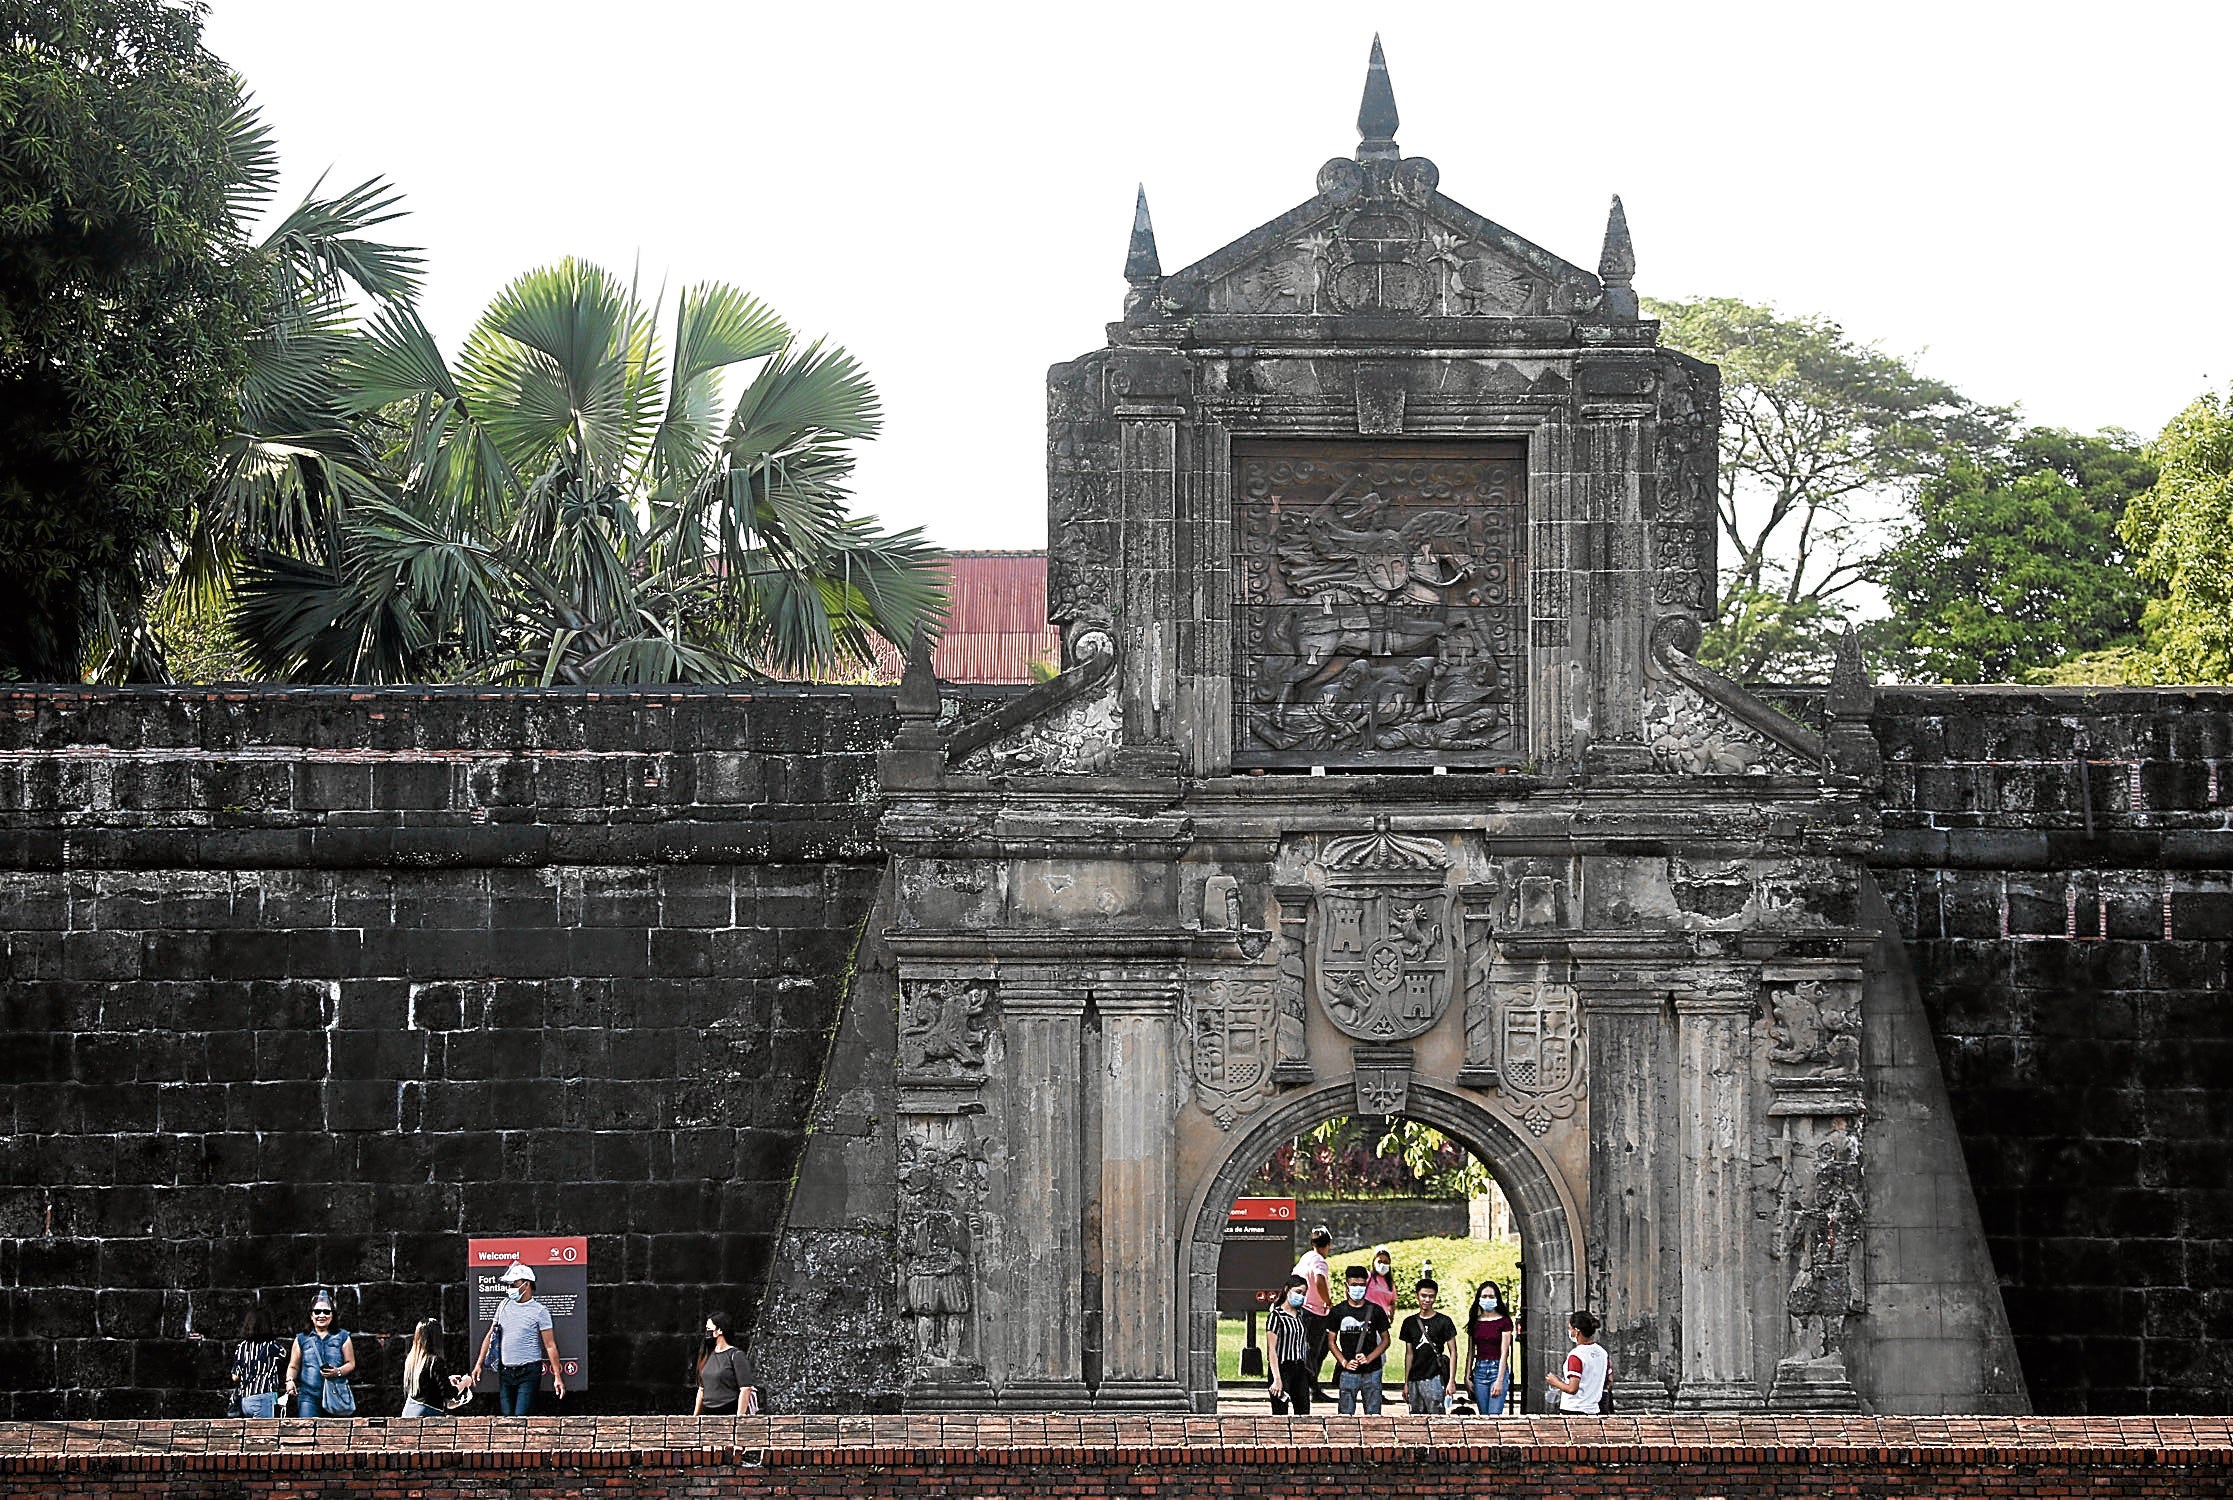 Intramuros is the historic old walled city part of Manila